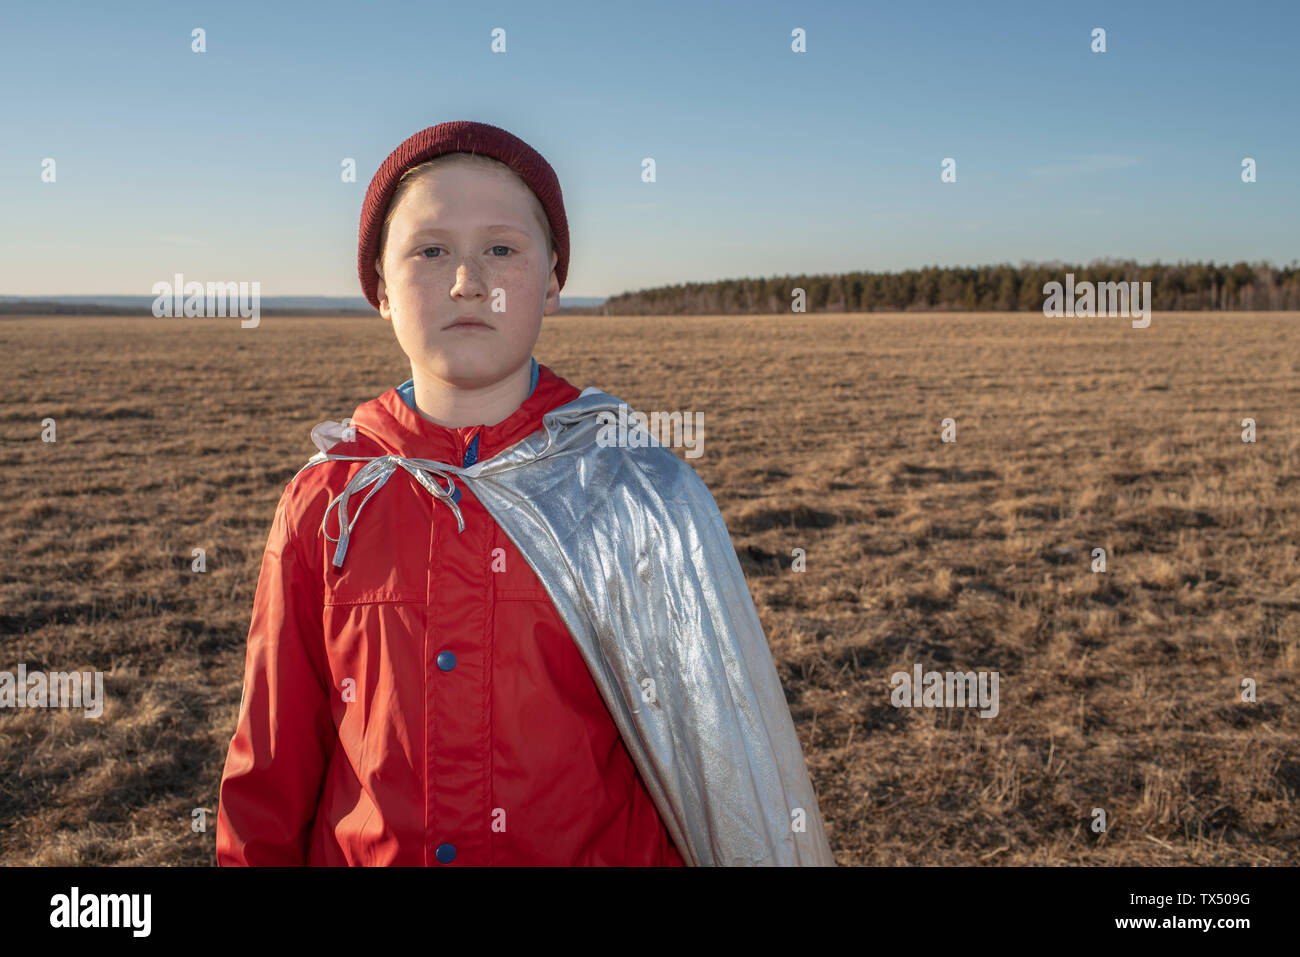 Portrait of boy dressed up as superhero in steppe landscape Stock Photo